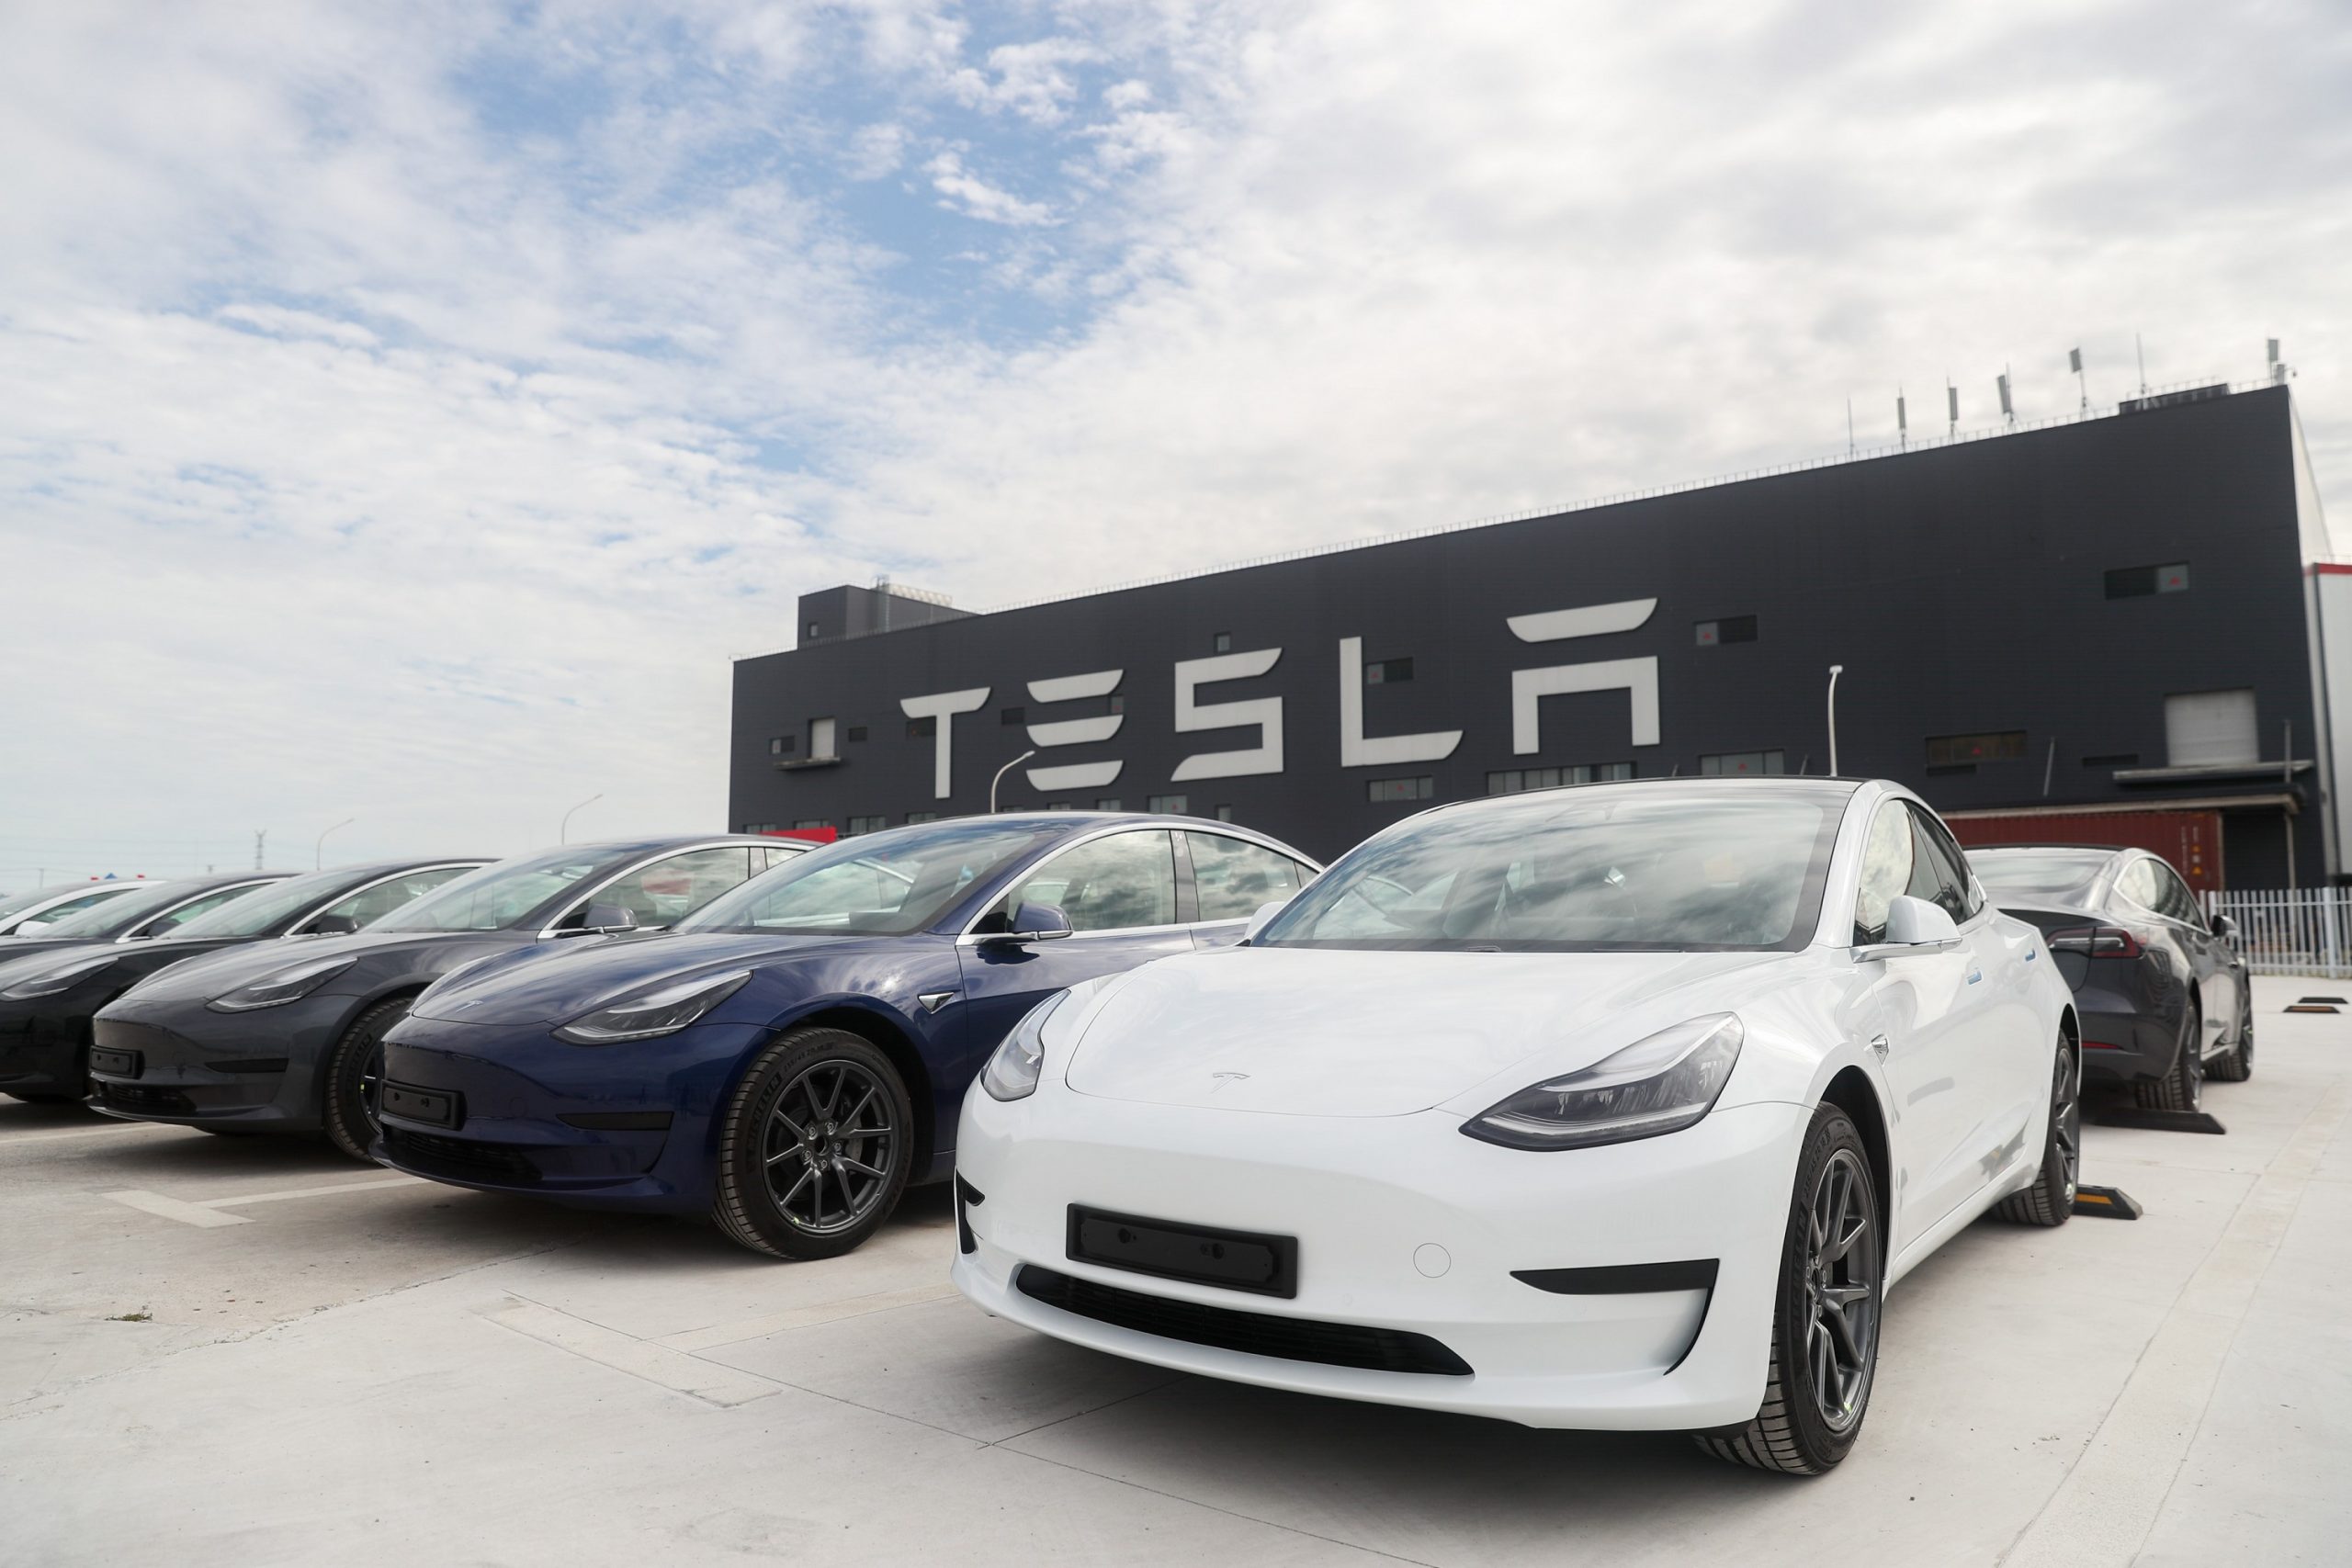 A group of Tesla Model 3 EVs outside one of the brand's factories